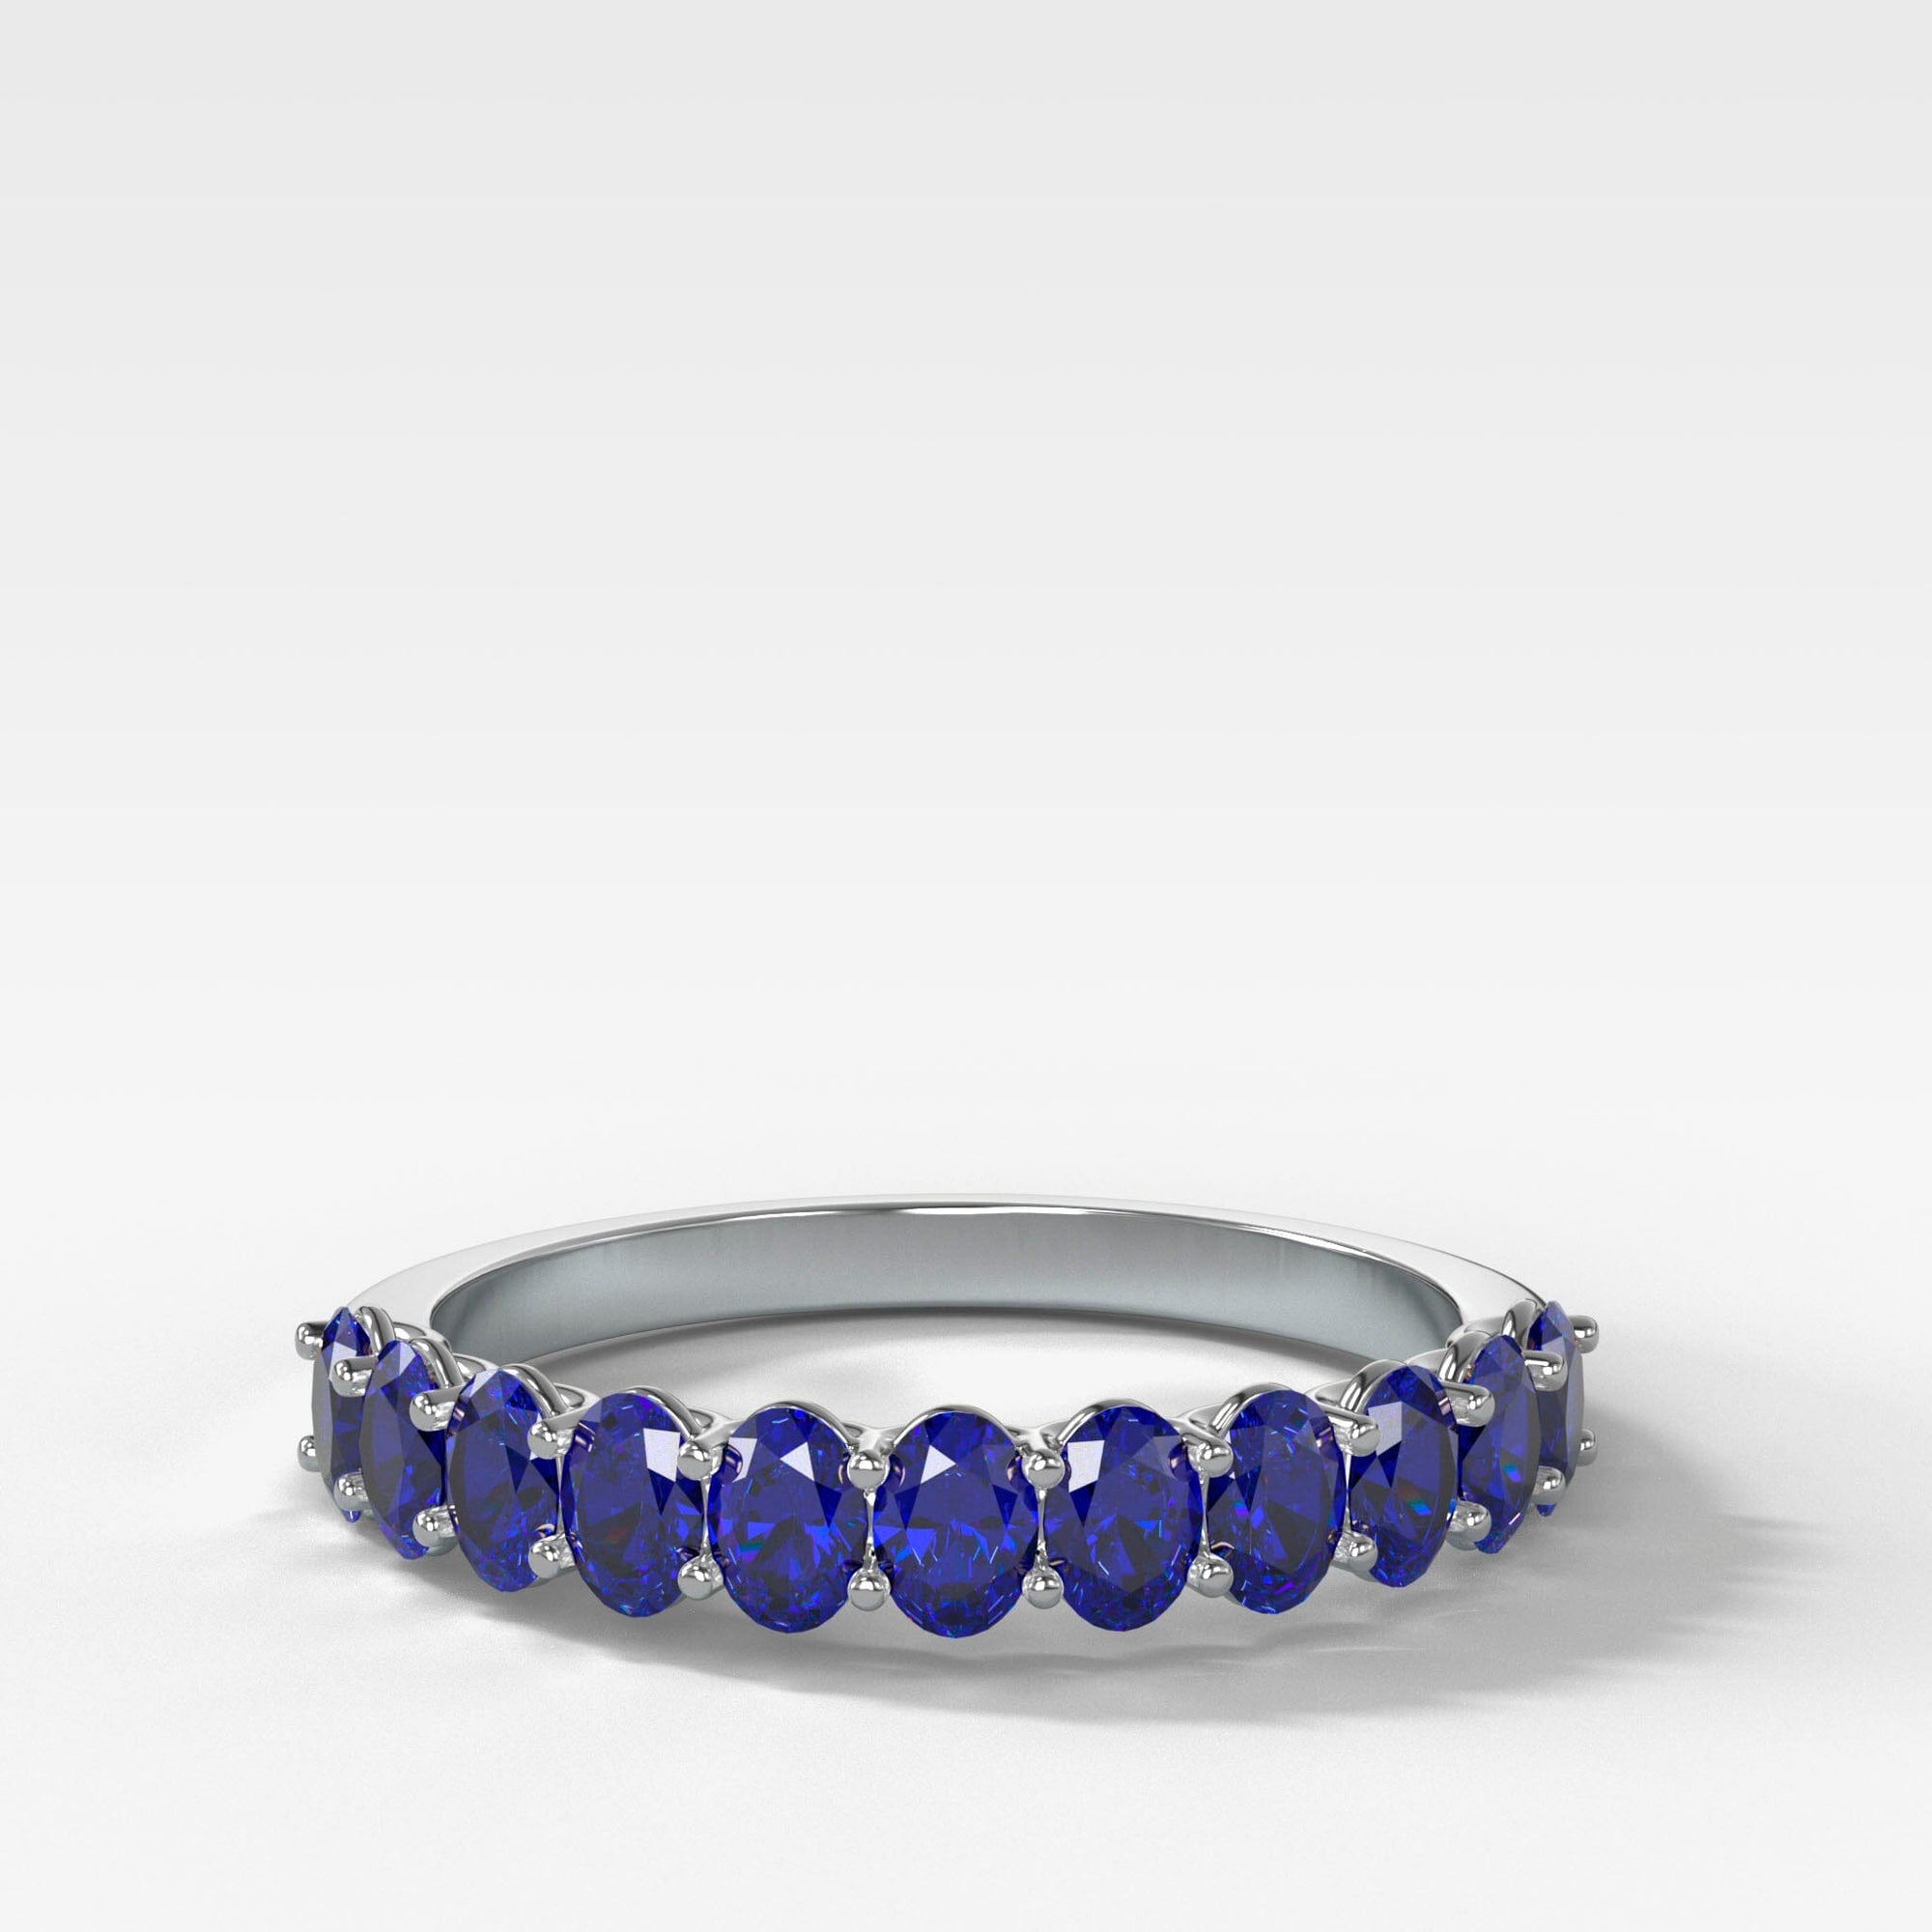 Petite Shared Prong Wedding Band with Blue Oval Sapphires Band Good Stone Inc Yellow Gold 14k Natural